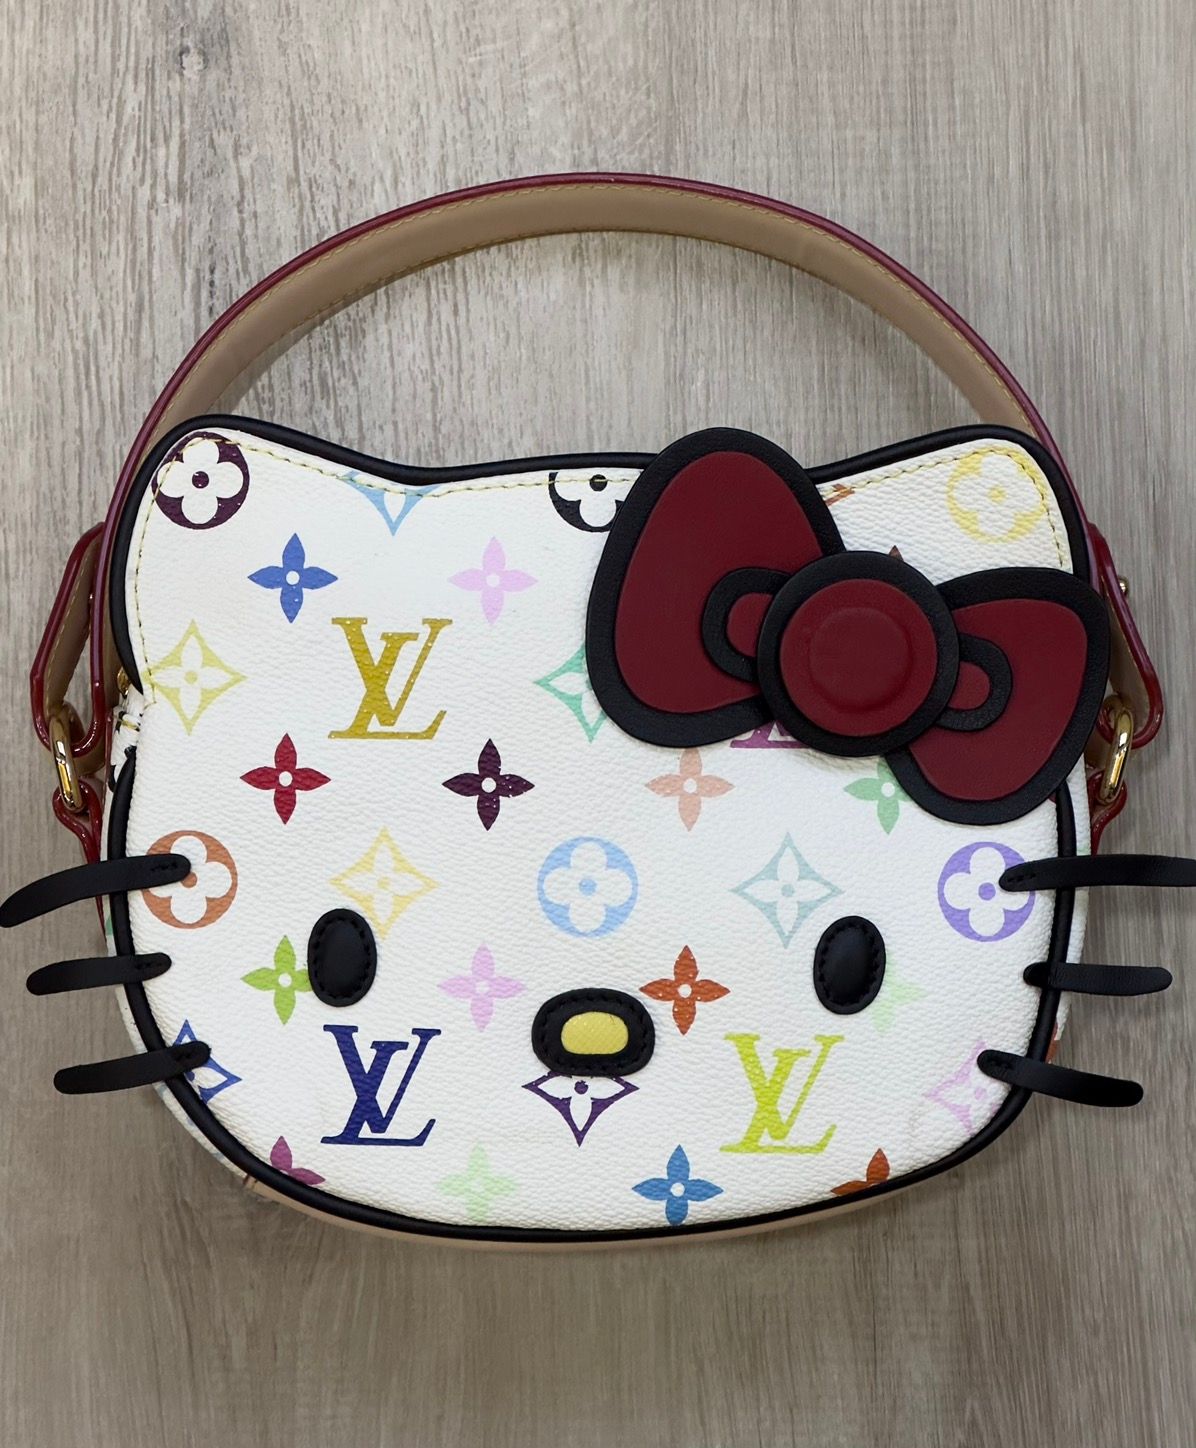 Hello Kitty Louis Vuitton Bags Upcycled By American Designer